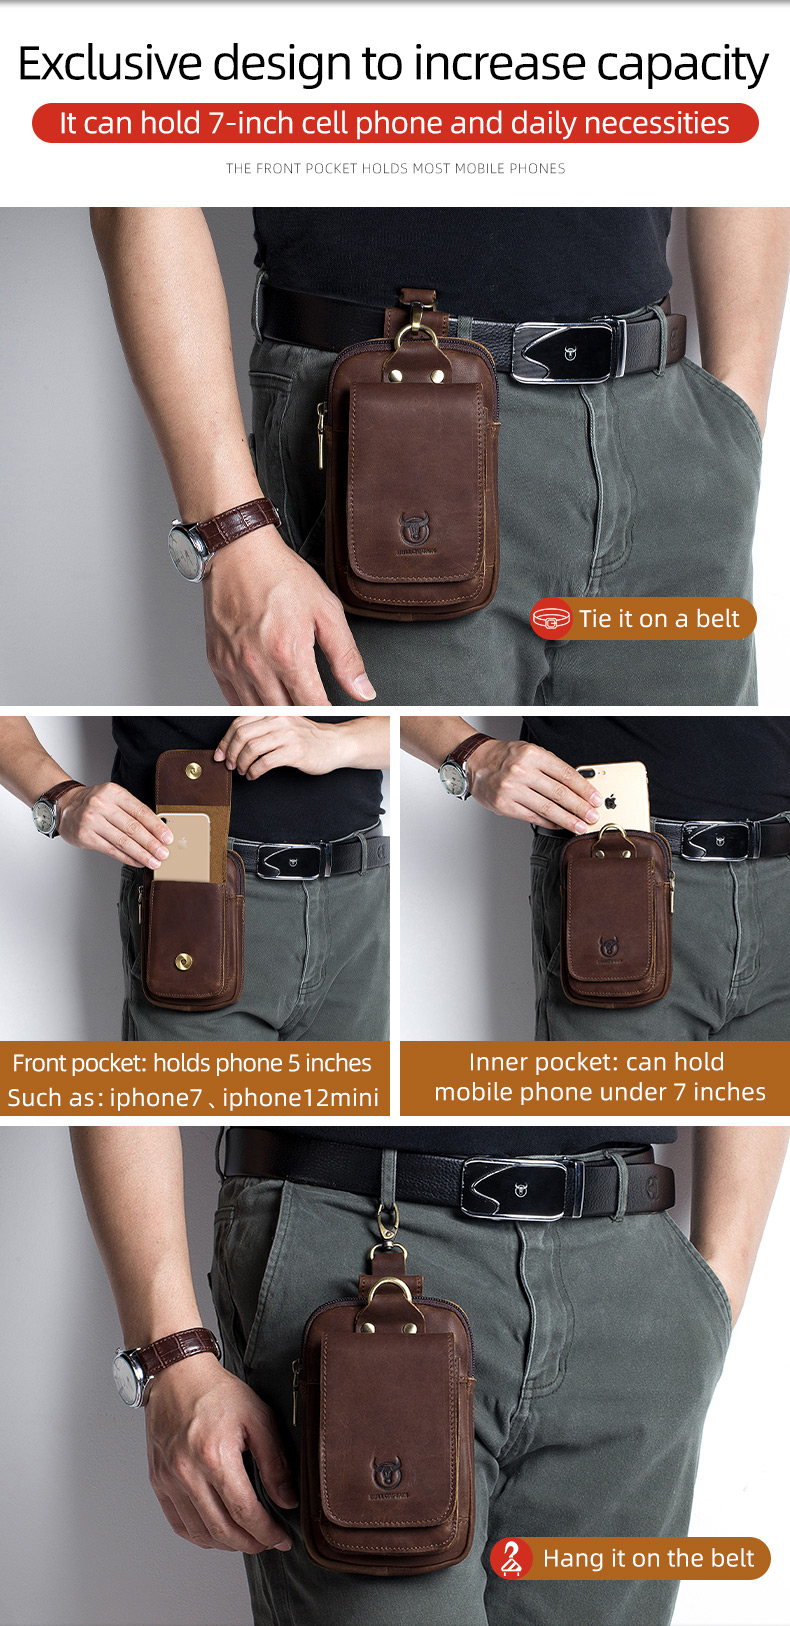 come4buy.com-Quality Leather 7 inch Phone Pouch Waist Belt Bag